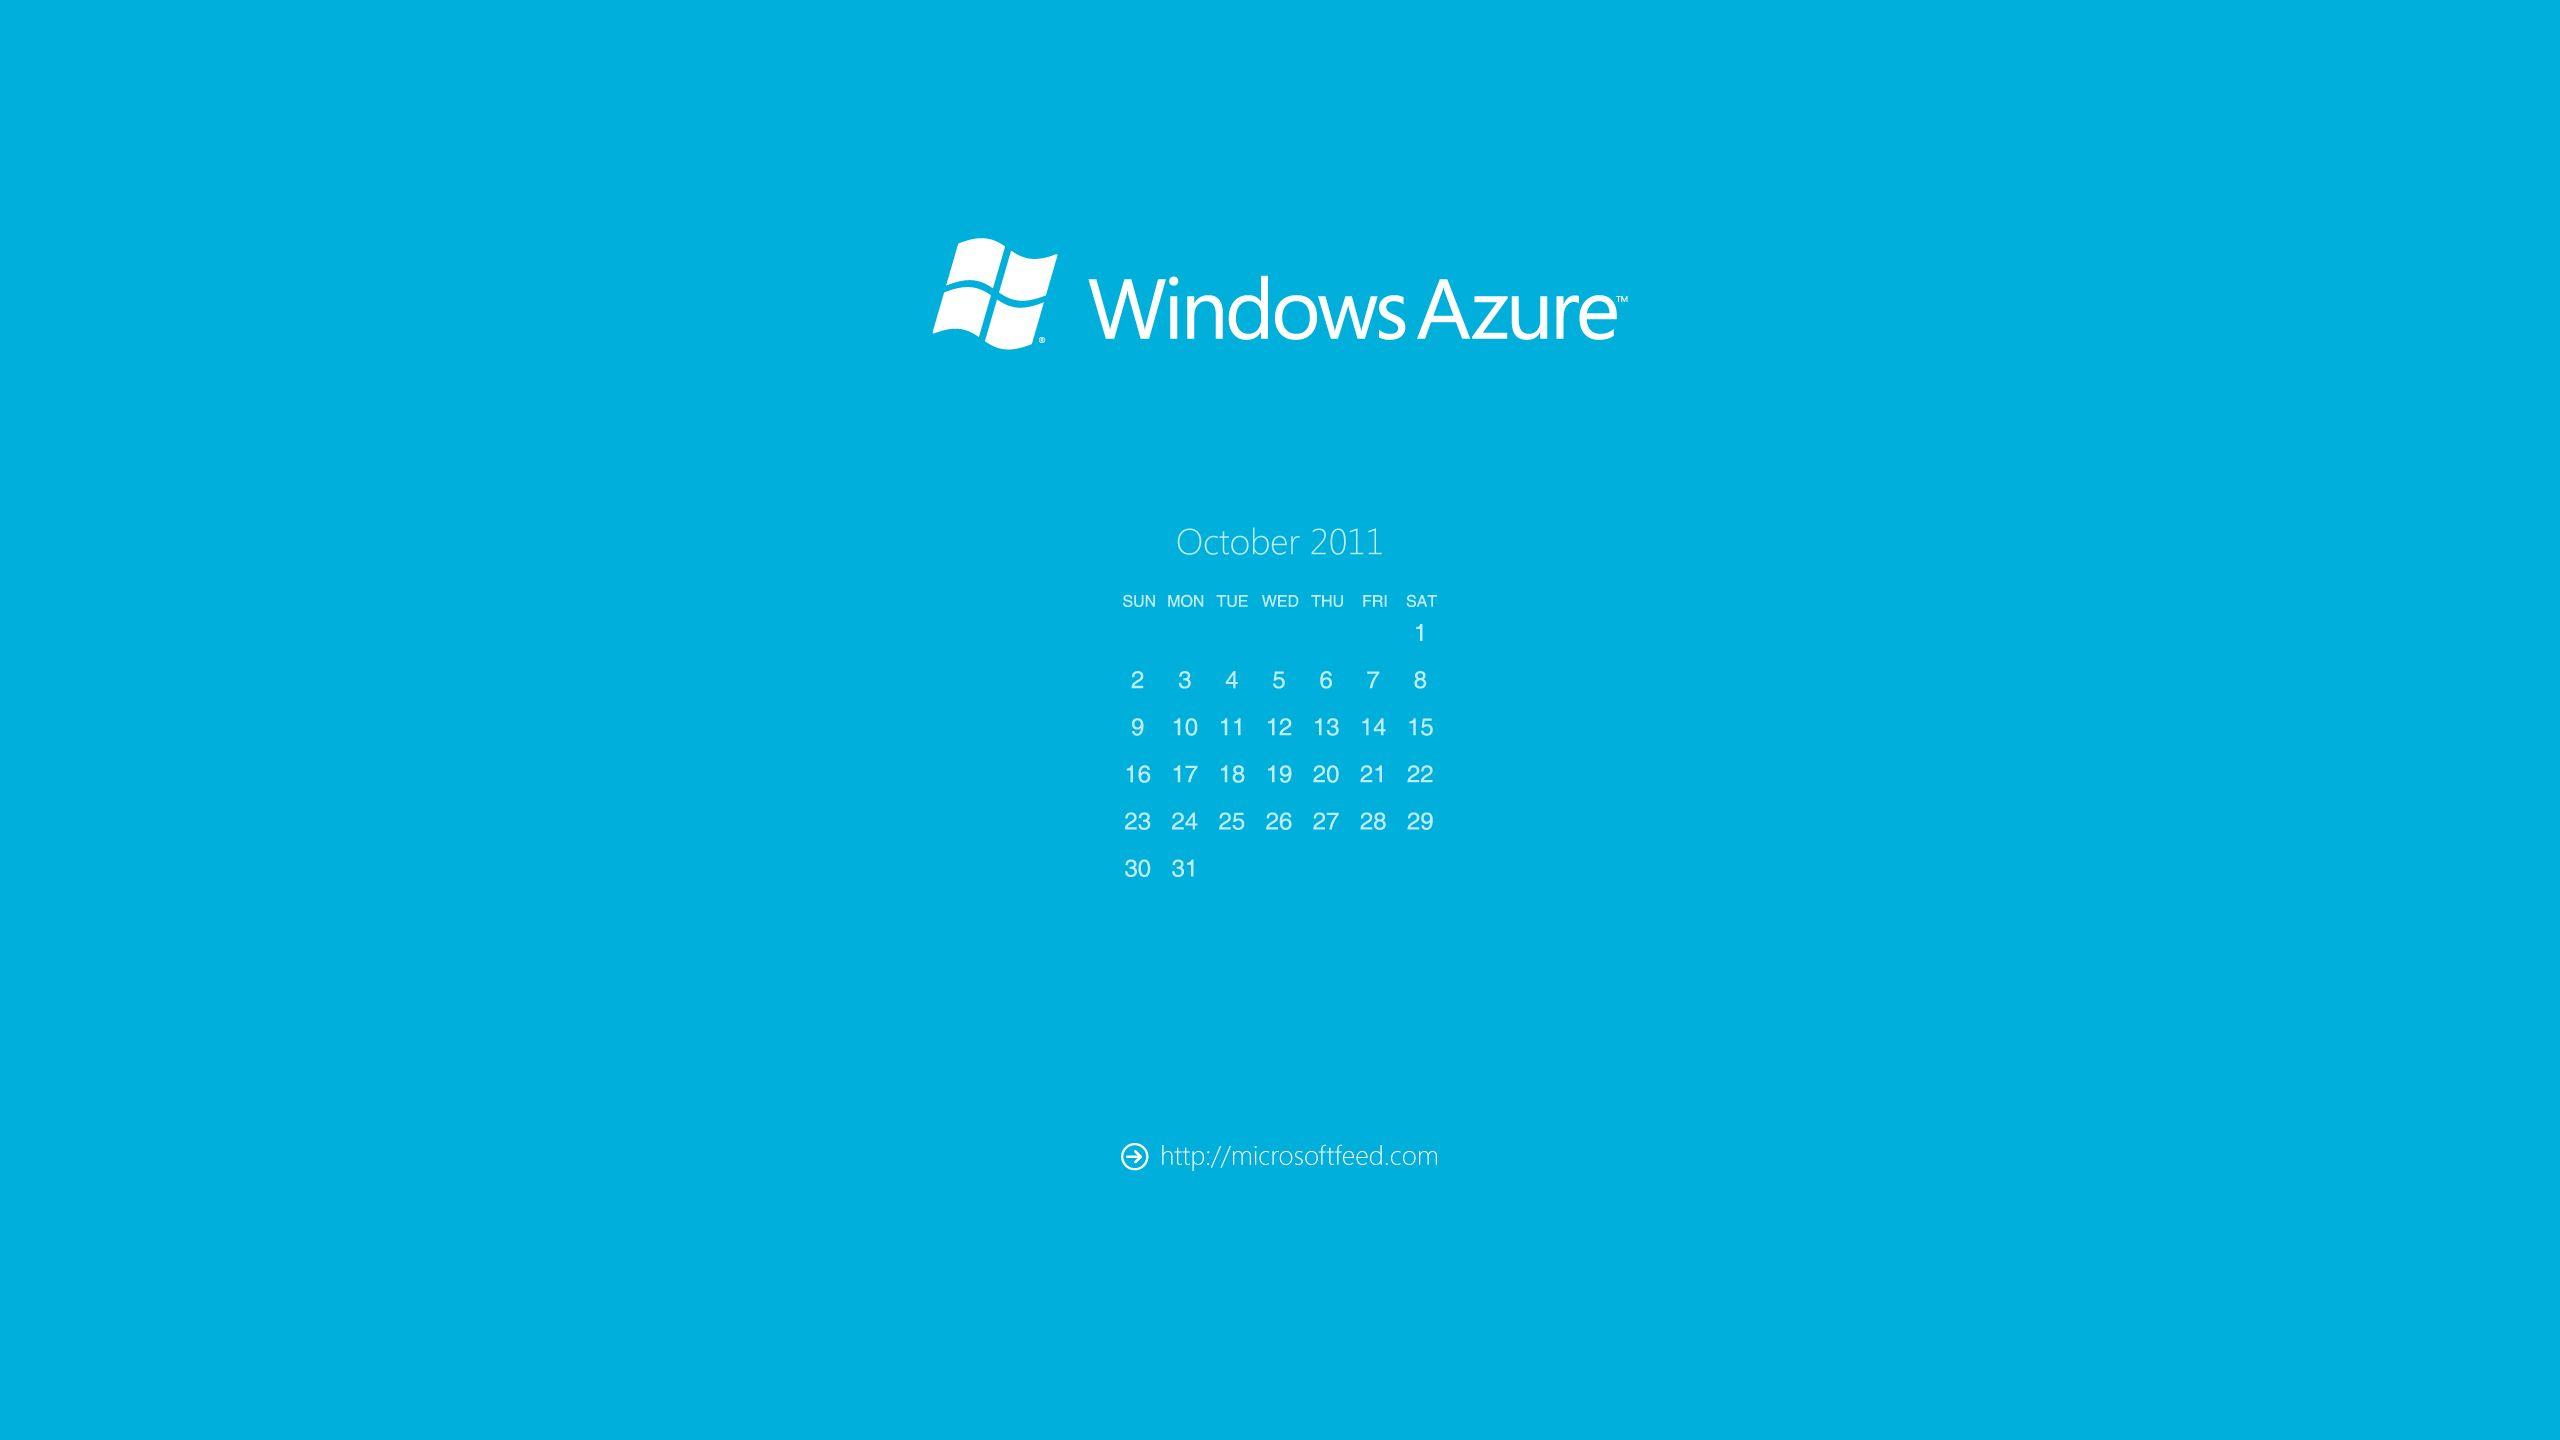 Windows Azure Wallpapers with 2560x1440 Resolution